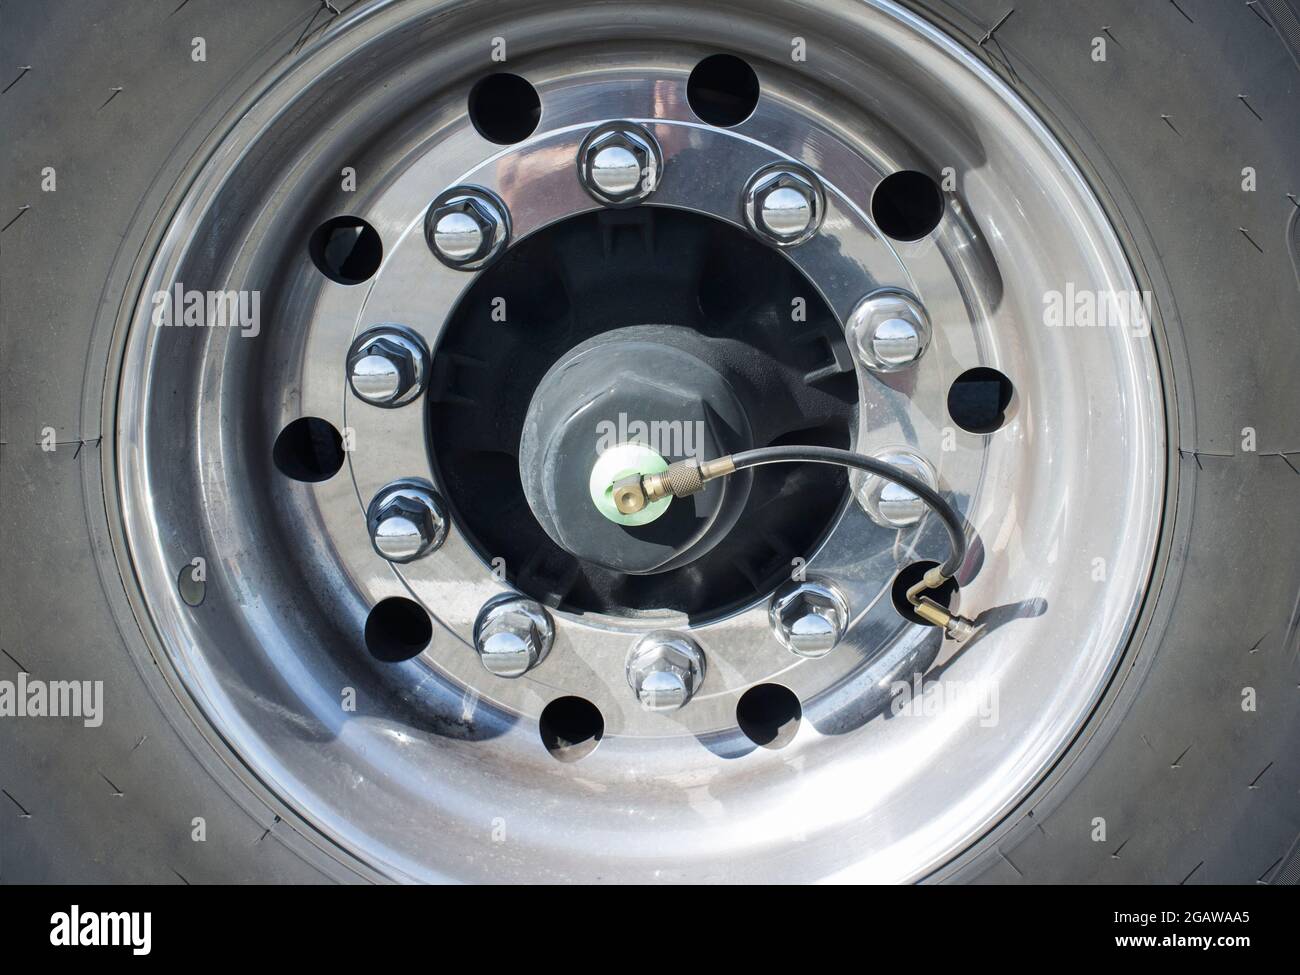 Truck wheel equipped with tire inflation system. Closeup Stock Photo